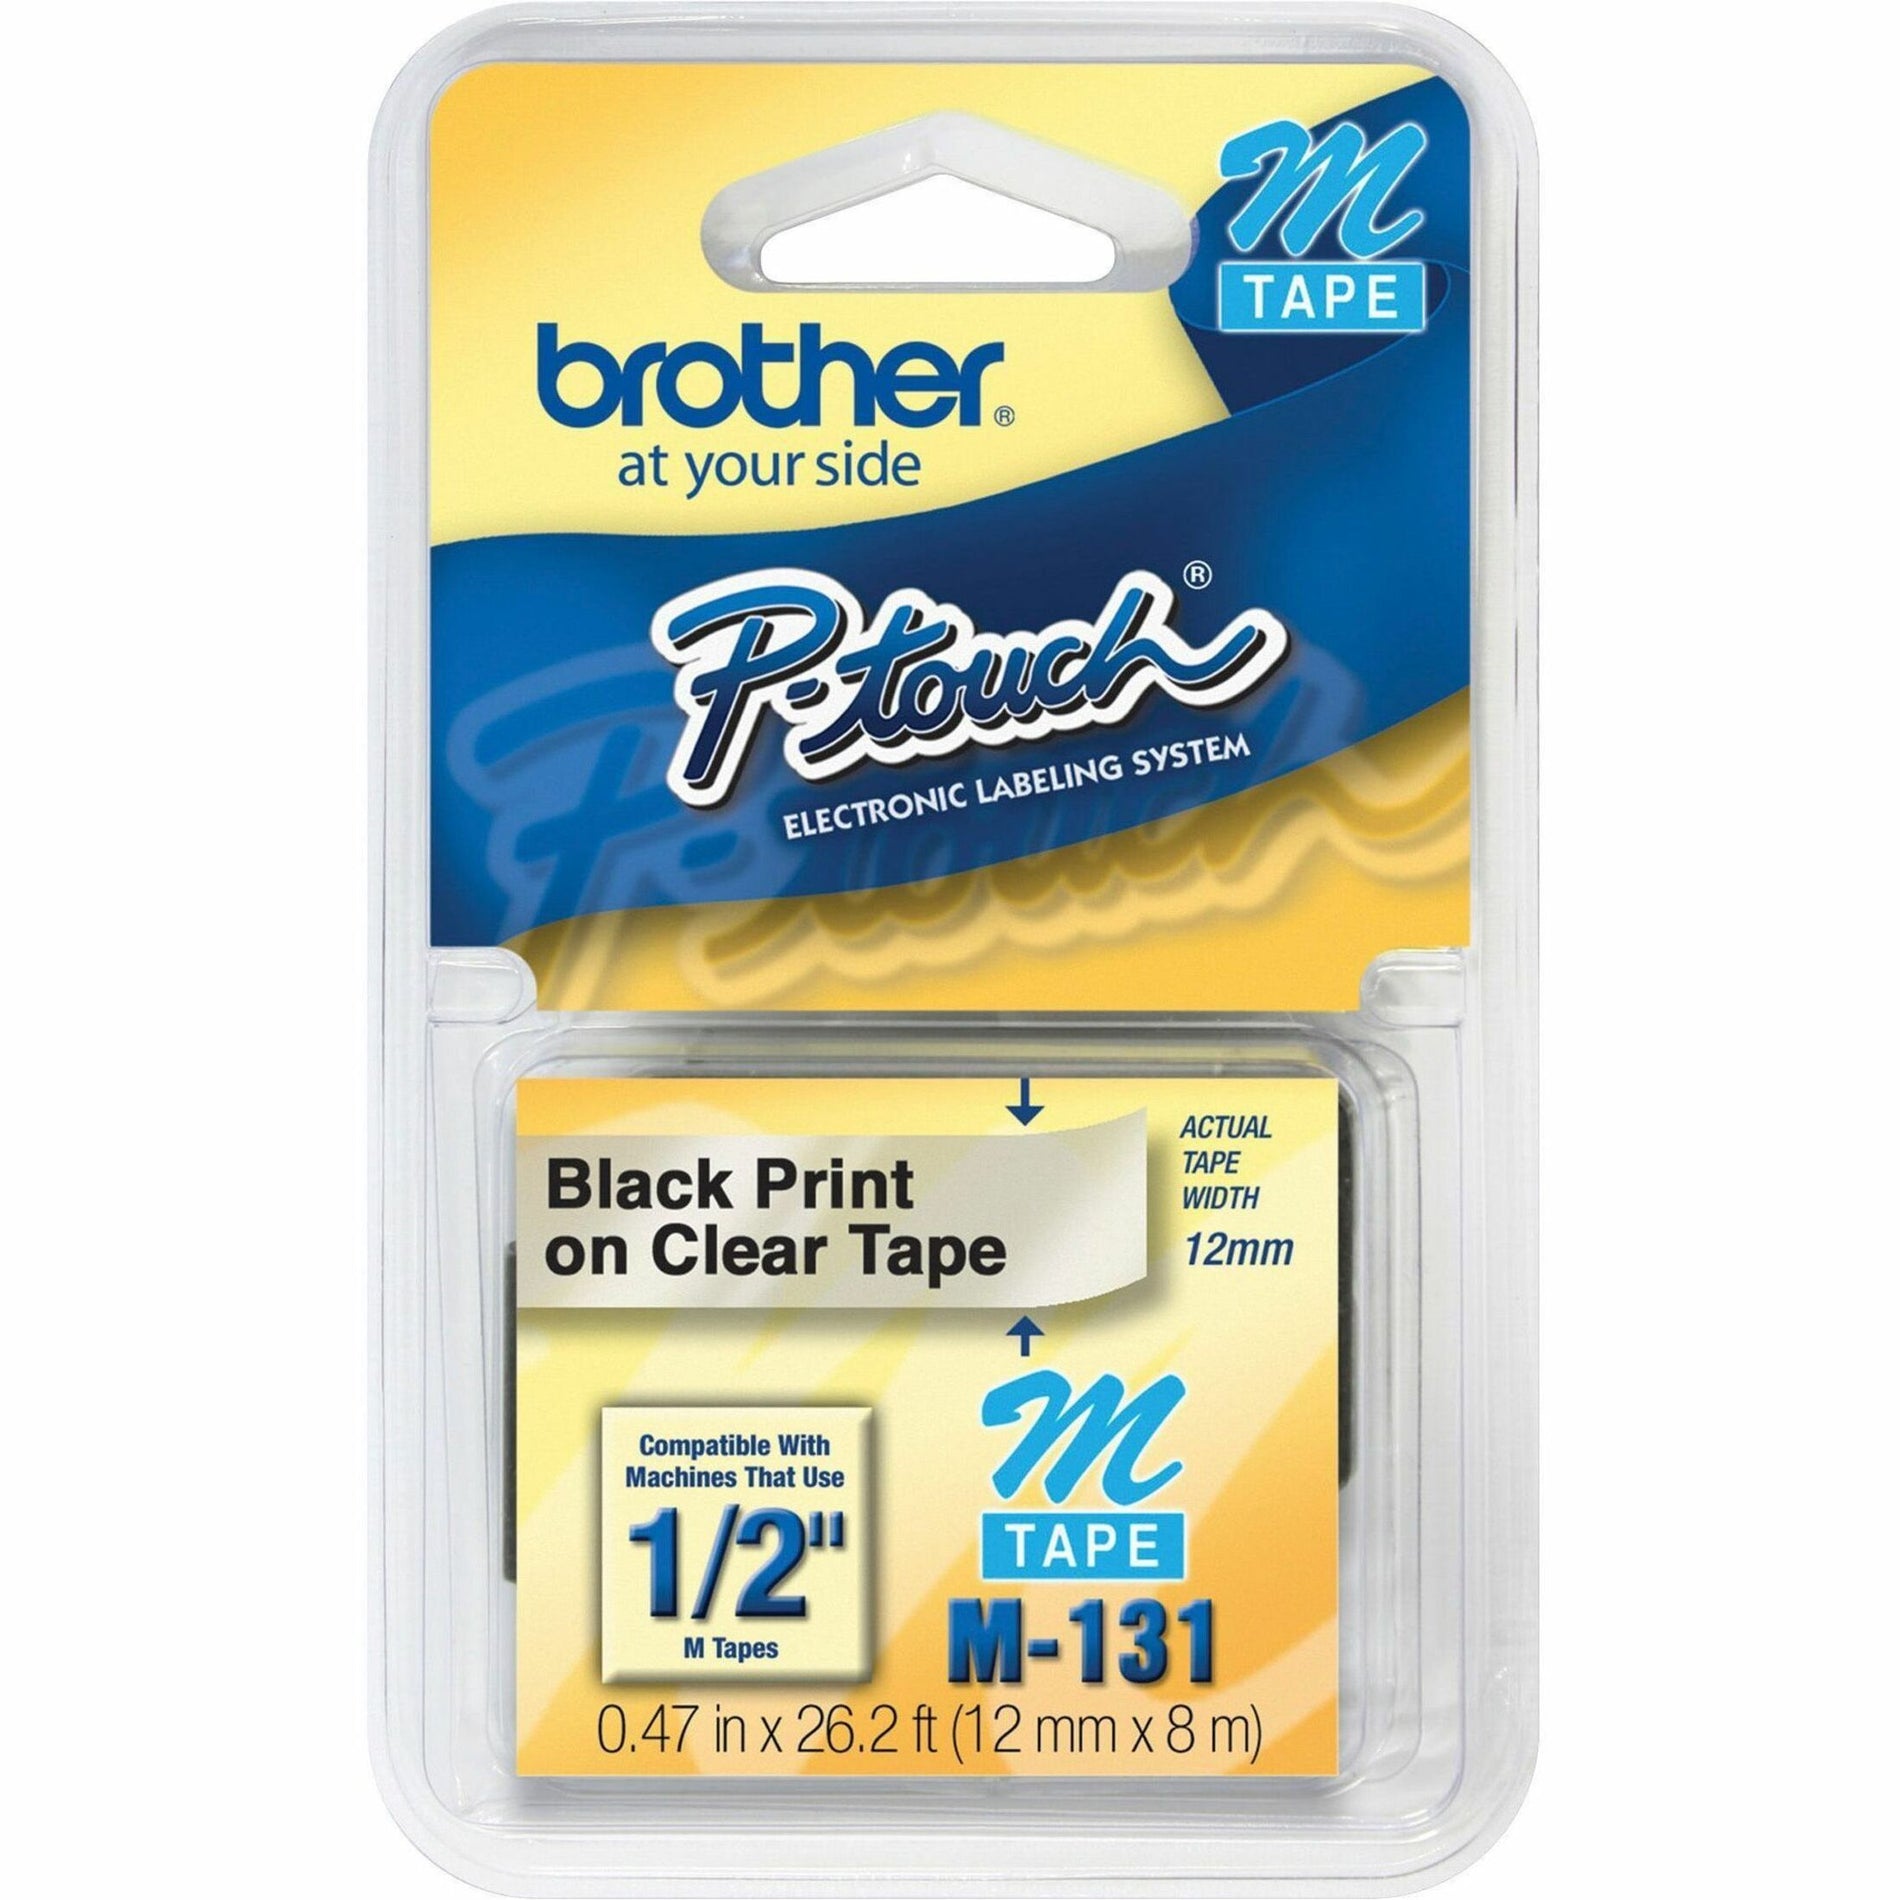 Brother M131 P-touch System 1/2" Black on Clear M Tape, Non-Laminated Label Tape